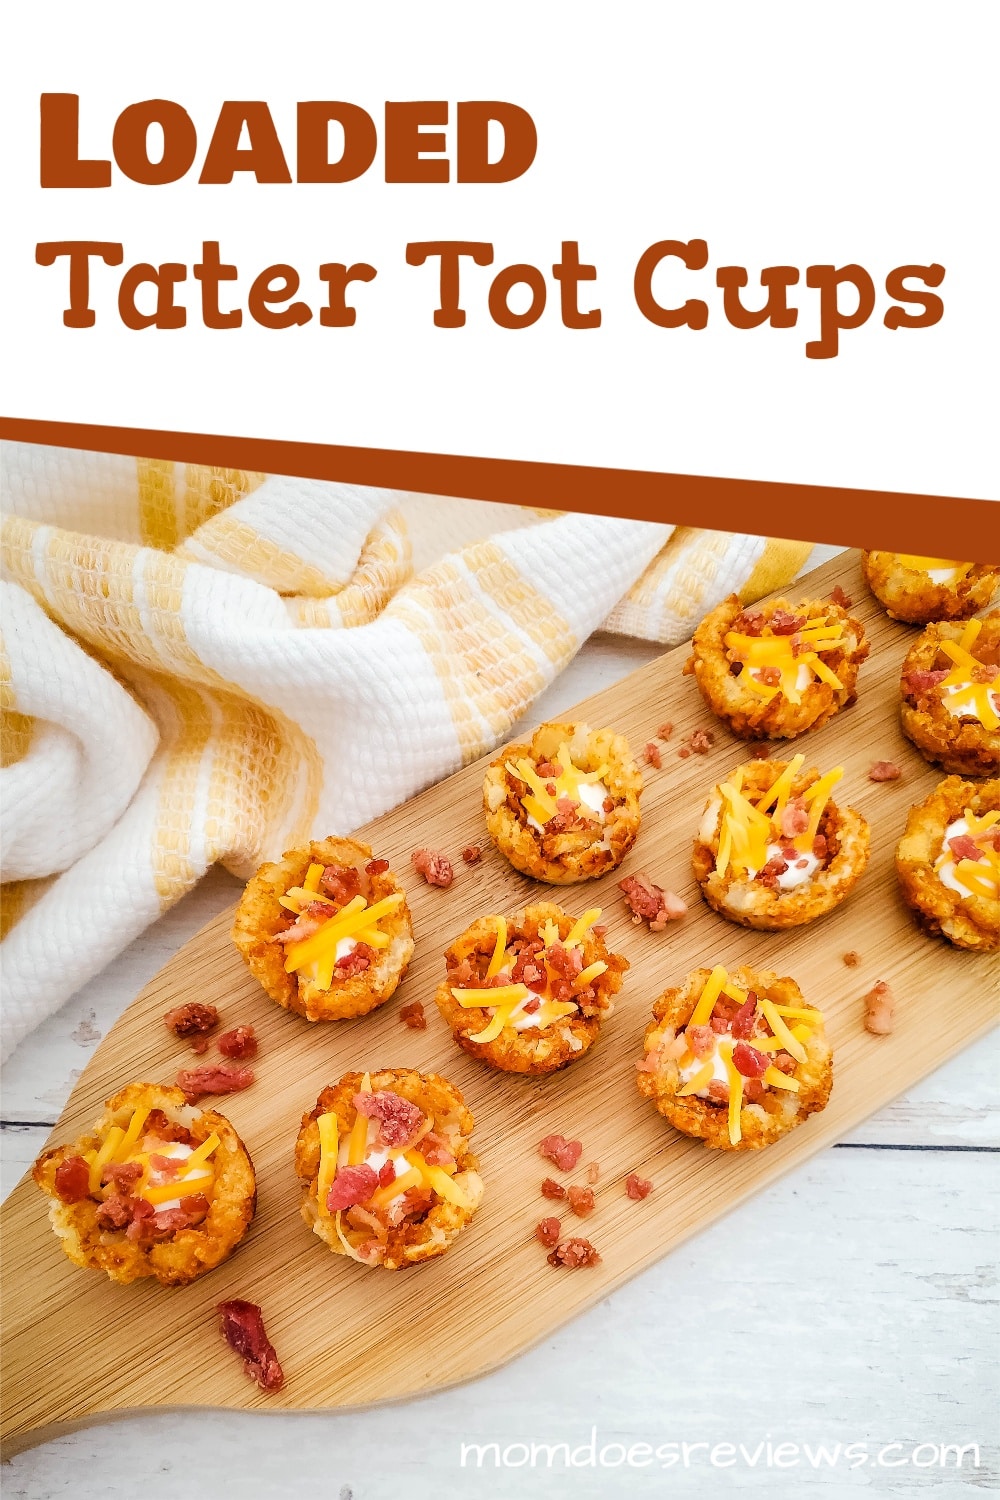 These loaded tater tot cups are easy to make and oh-so delicious! Perfect for an appetizer or side dish (think burgers, sloppy joe’s etc), these delicious bites are sure to please! My favorite part: you only need four ingredients to make this yummy app!  